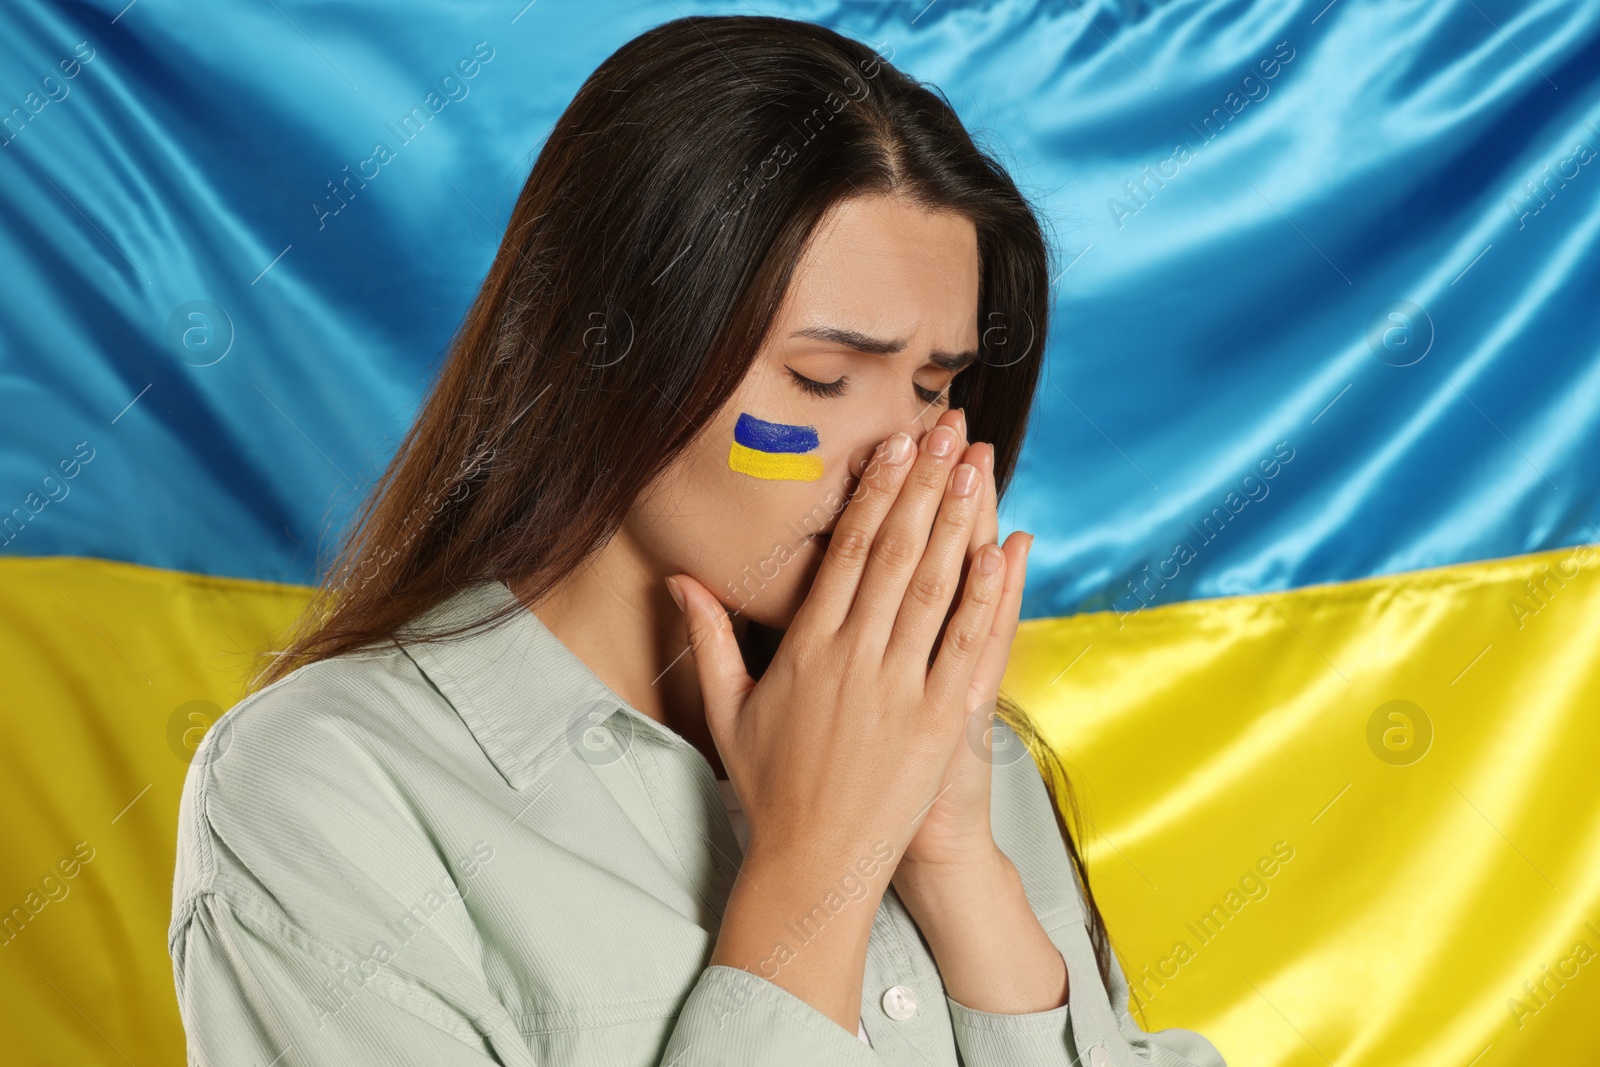 Photo of Sad young woman with clasped hands near Ukrainian flag. Space for text